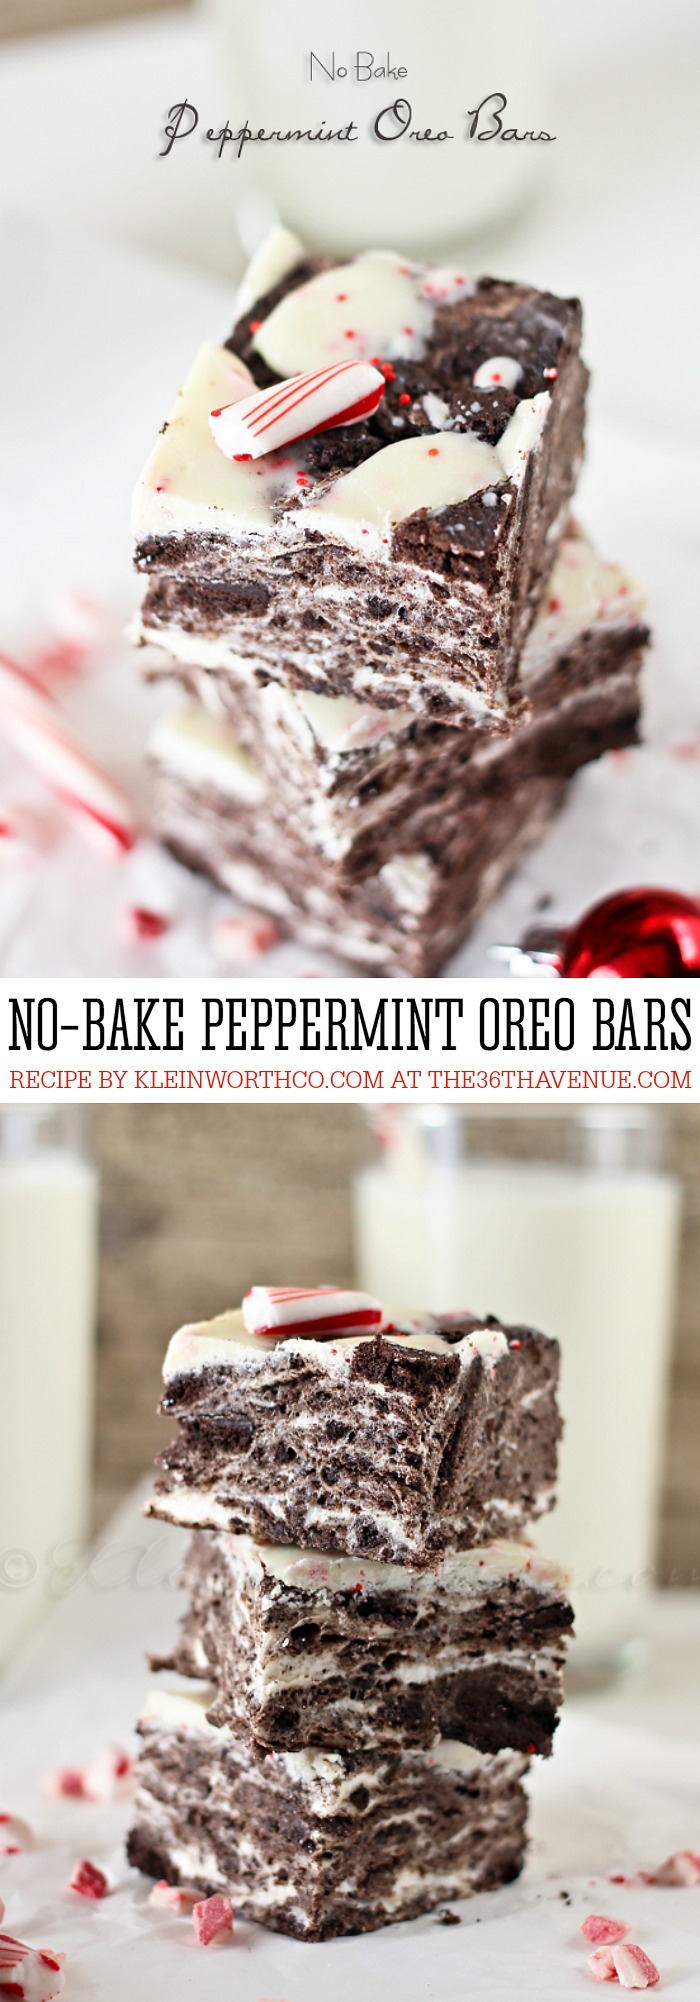 Best Recipes on Pinterest - This No Bake Peppermint Oreo Bars Recipe is amazing and super easy to make! Perfect for Christmas dessert or as a delicious treat or snack! PIN IT NOW and make it later!